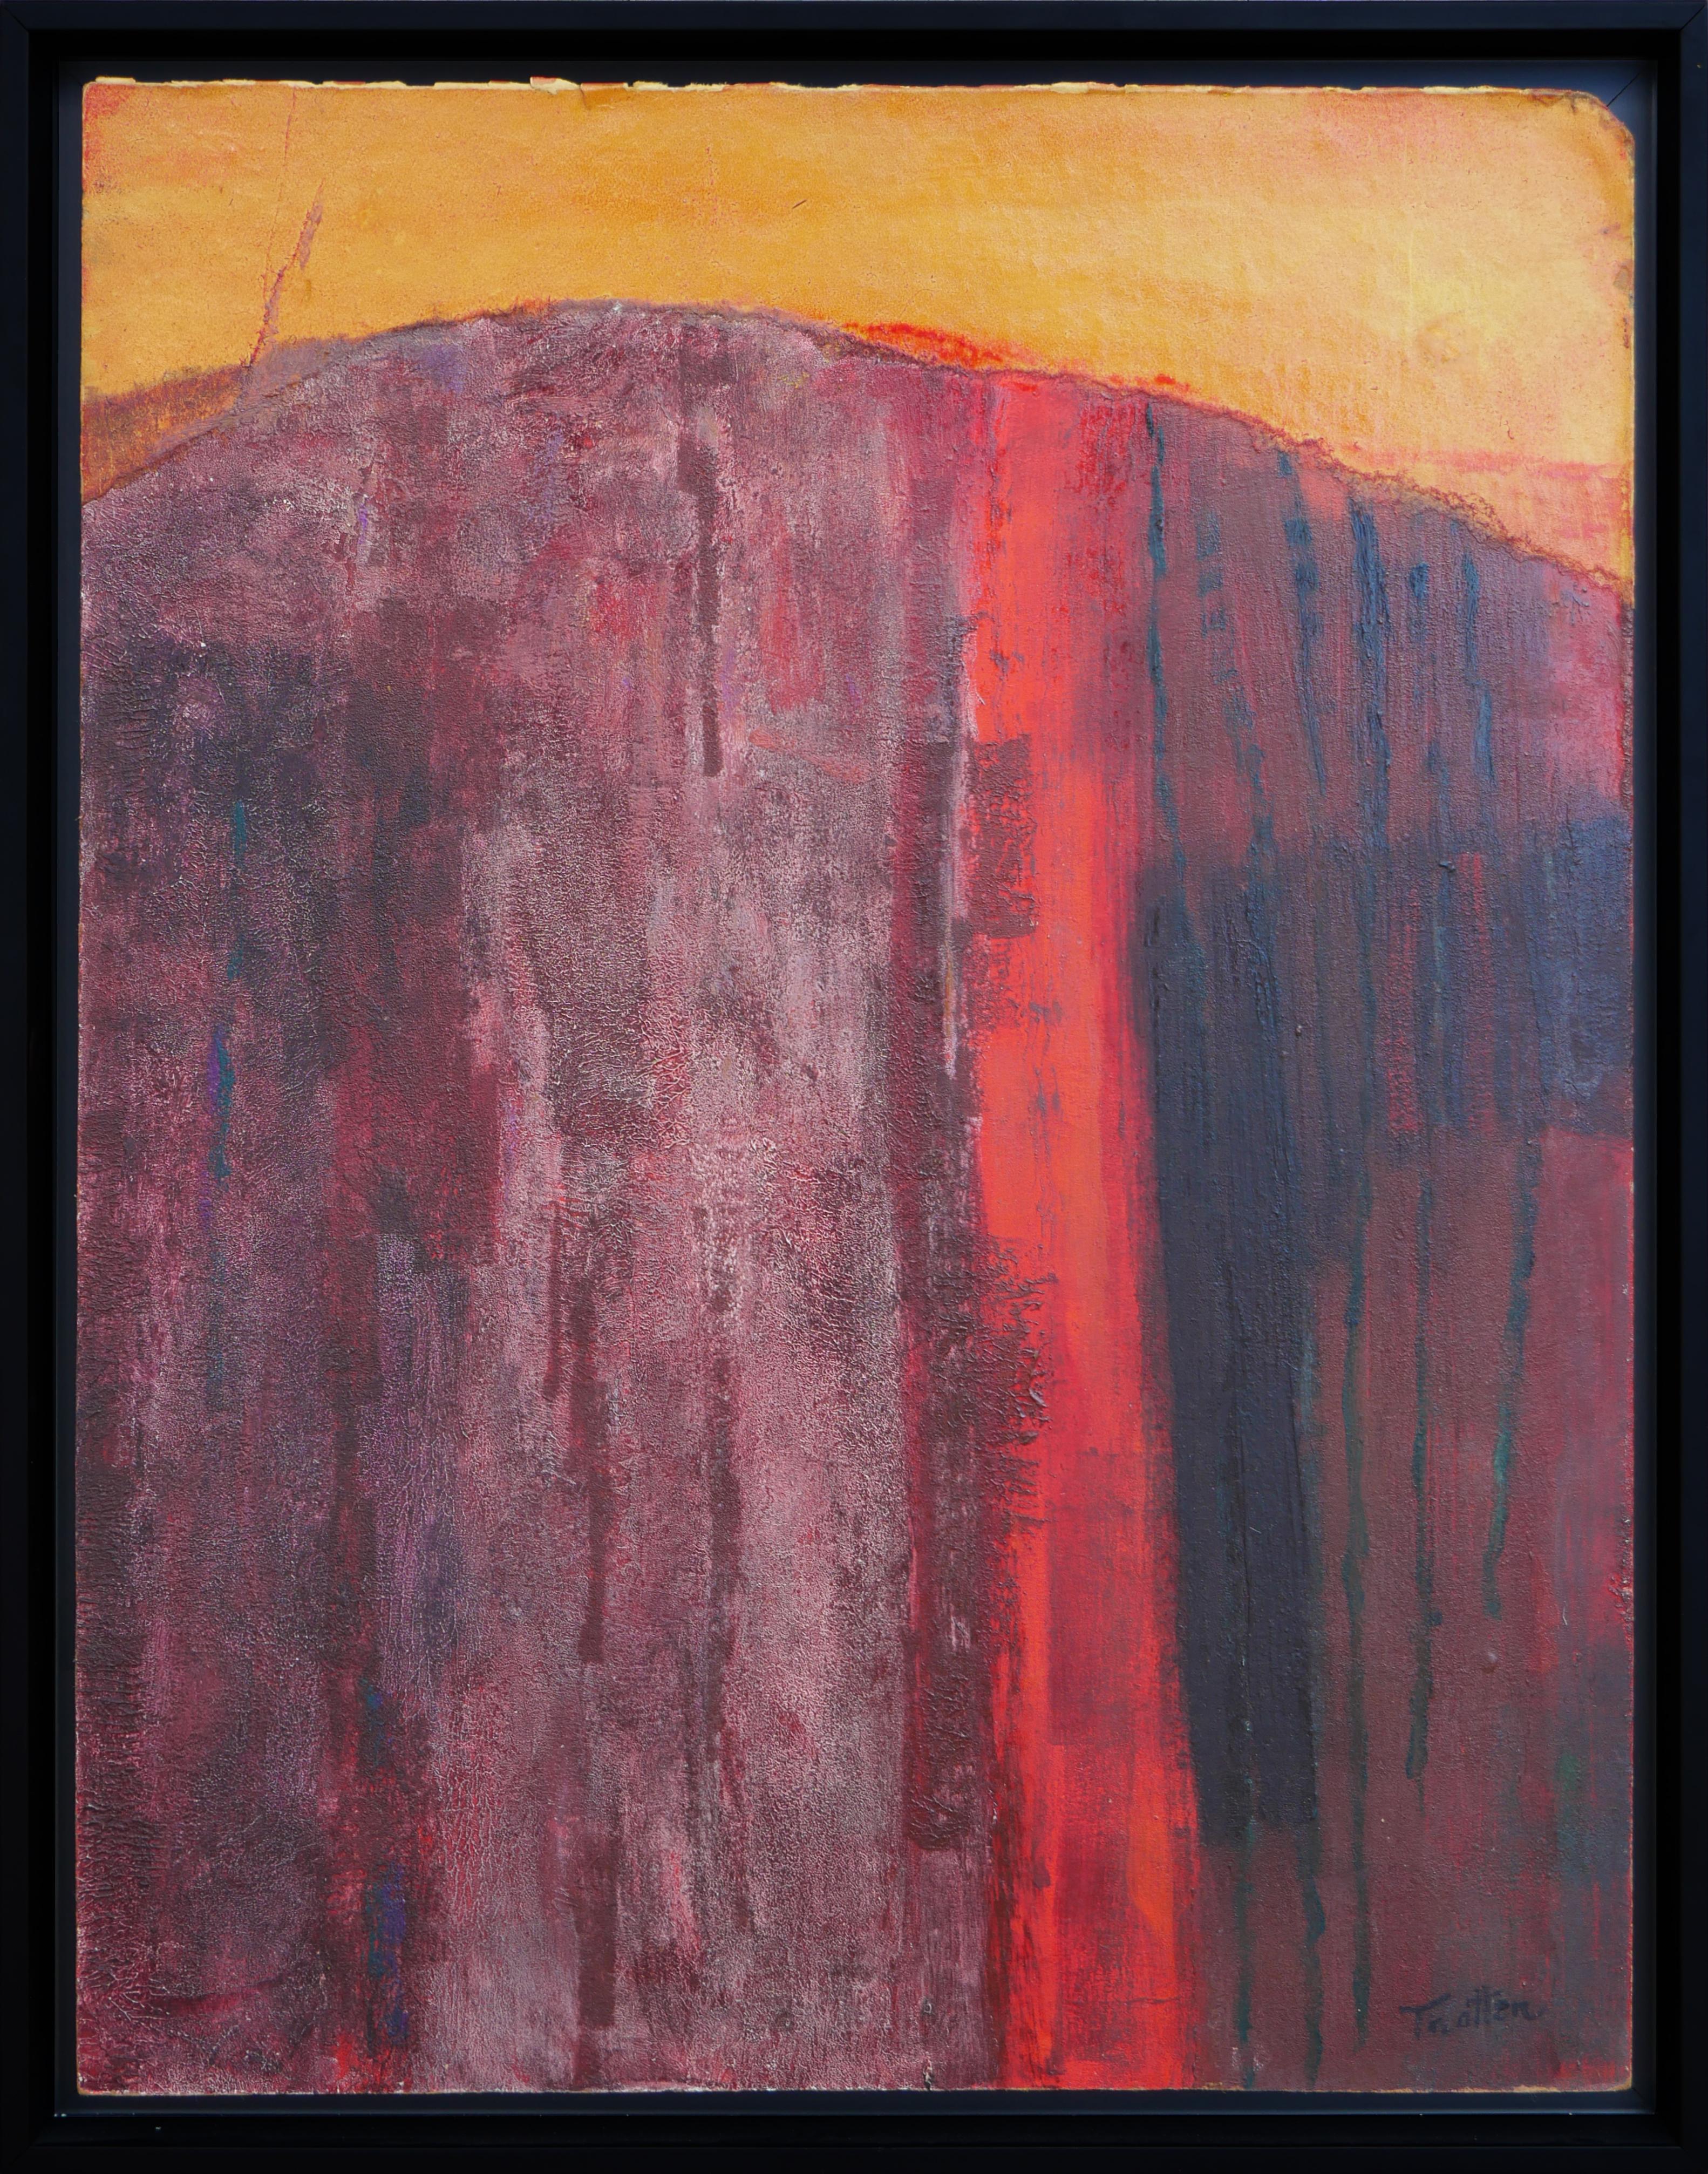 McKie Trotter Landscape Painting - "Road and Half Arch" Maroon, Red, and Orange Abstract Modernist Painting